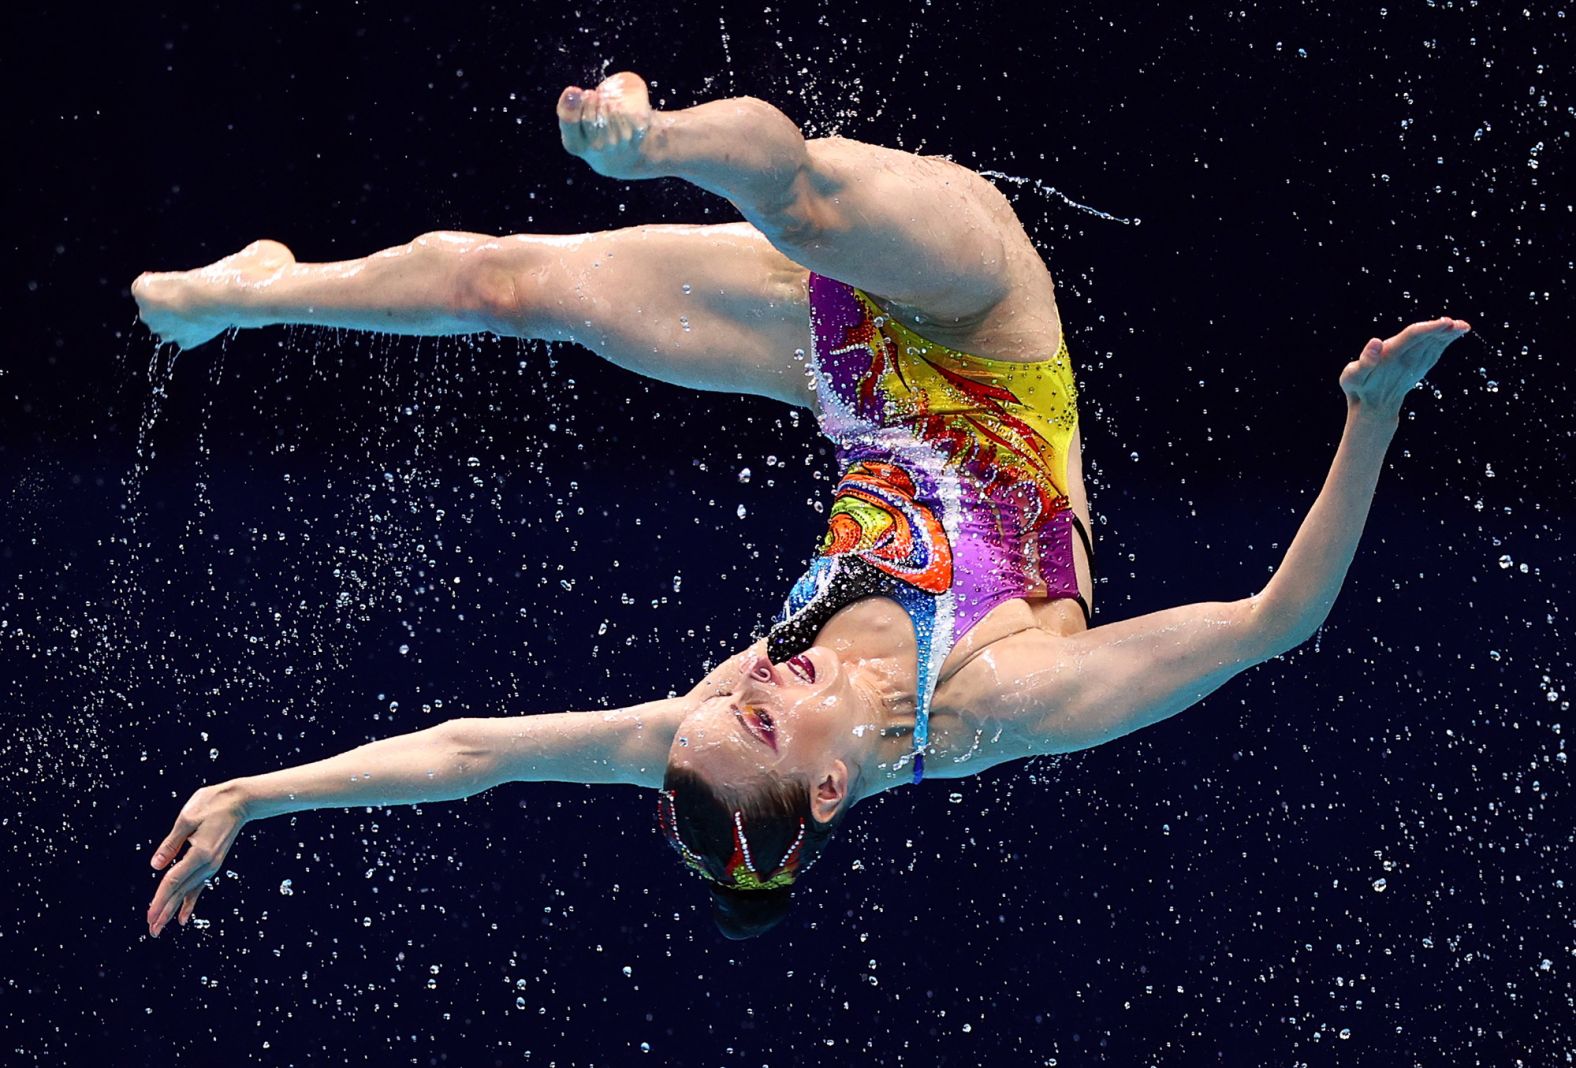 A Russian artistic swimmer competes in the team event on August 7. <a href="index.php?page=&url=https%3A%2F%2Fwww.cnn.com%2Fworld%2Flive-news%2Ftokyo-2020-olympics-08-07-21-spt%2Fh_2383664d8b845653690edb64f8fe7554" target="_blank">Russian swimmers won gold</a> in both the team and duet events in Tokyo.